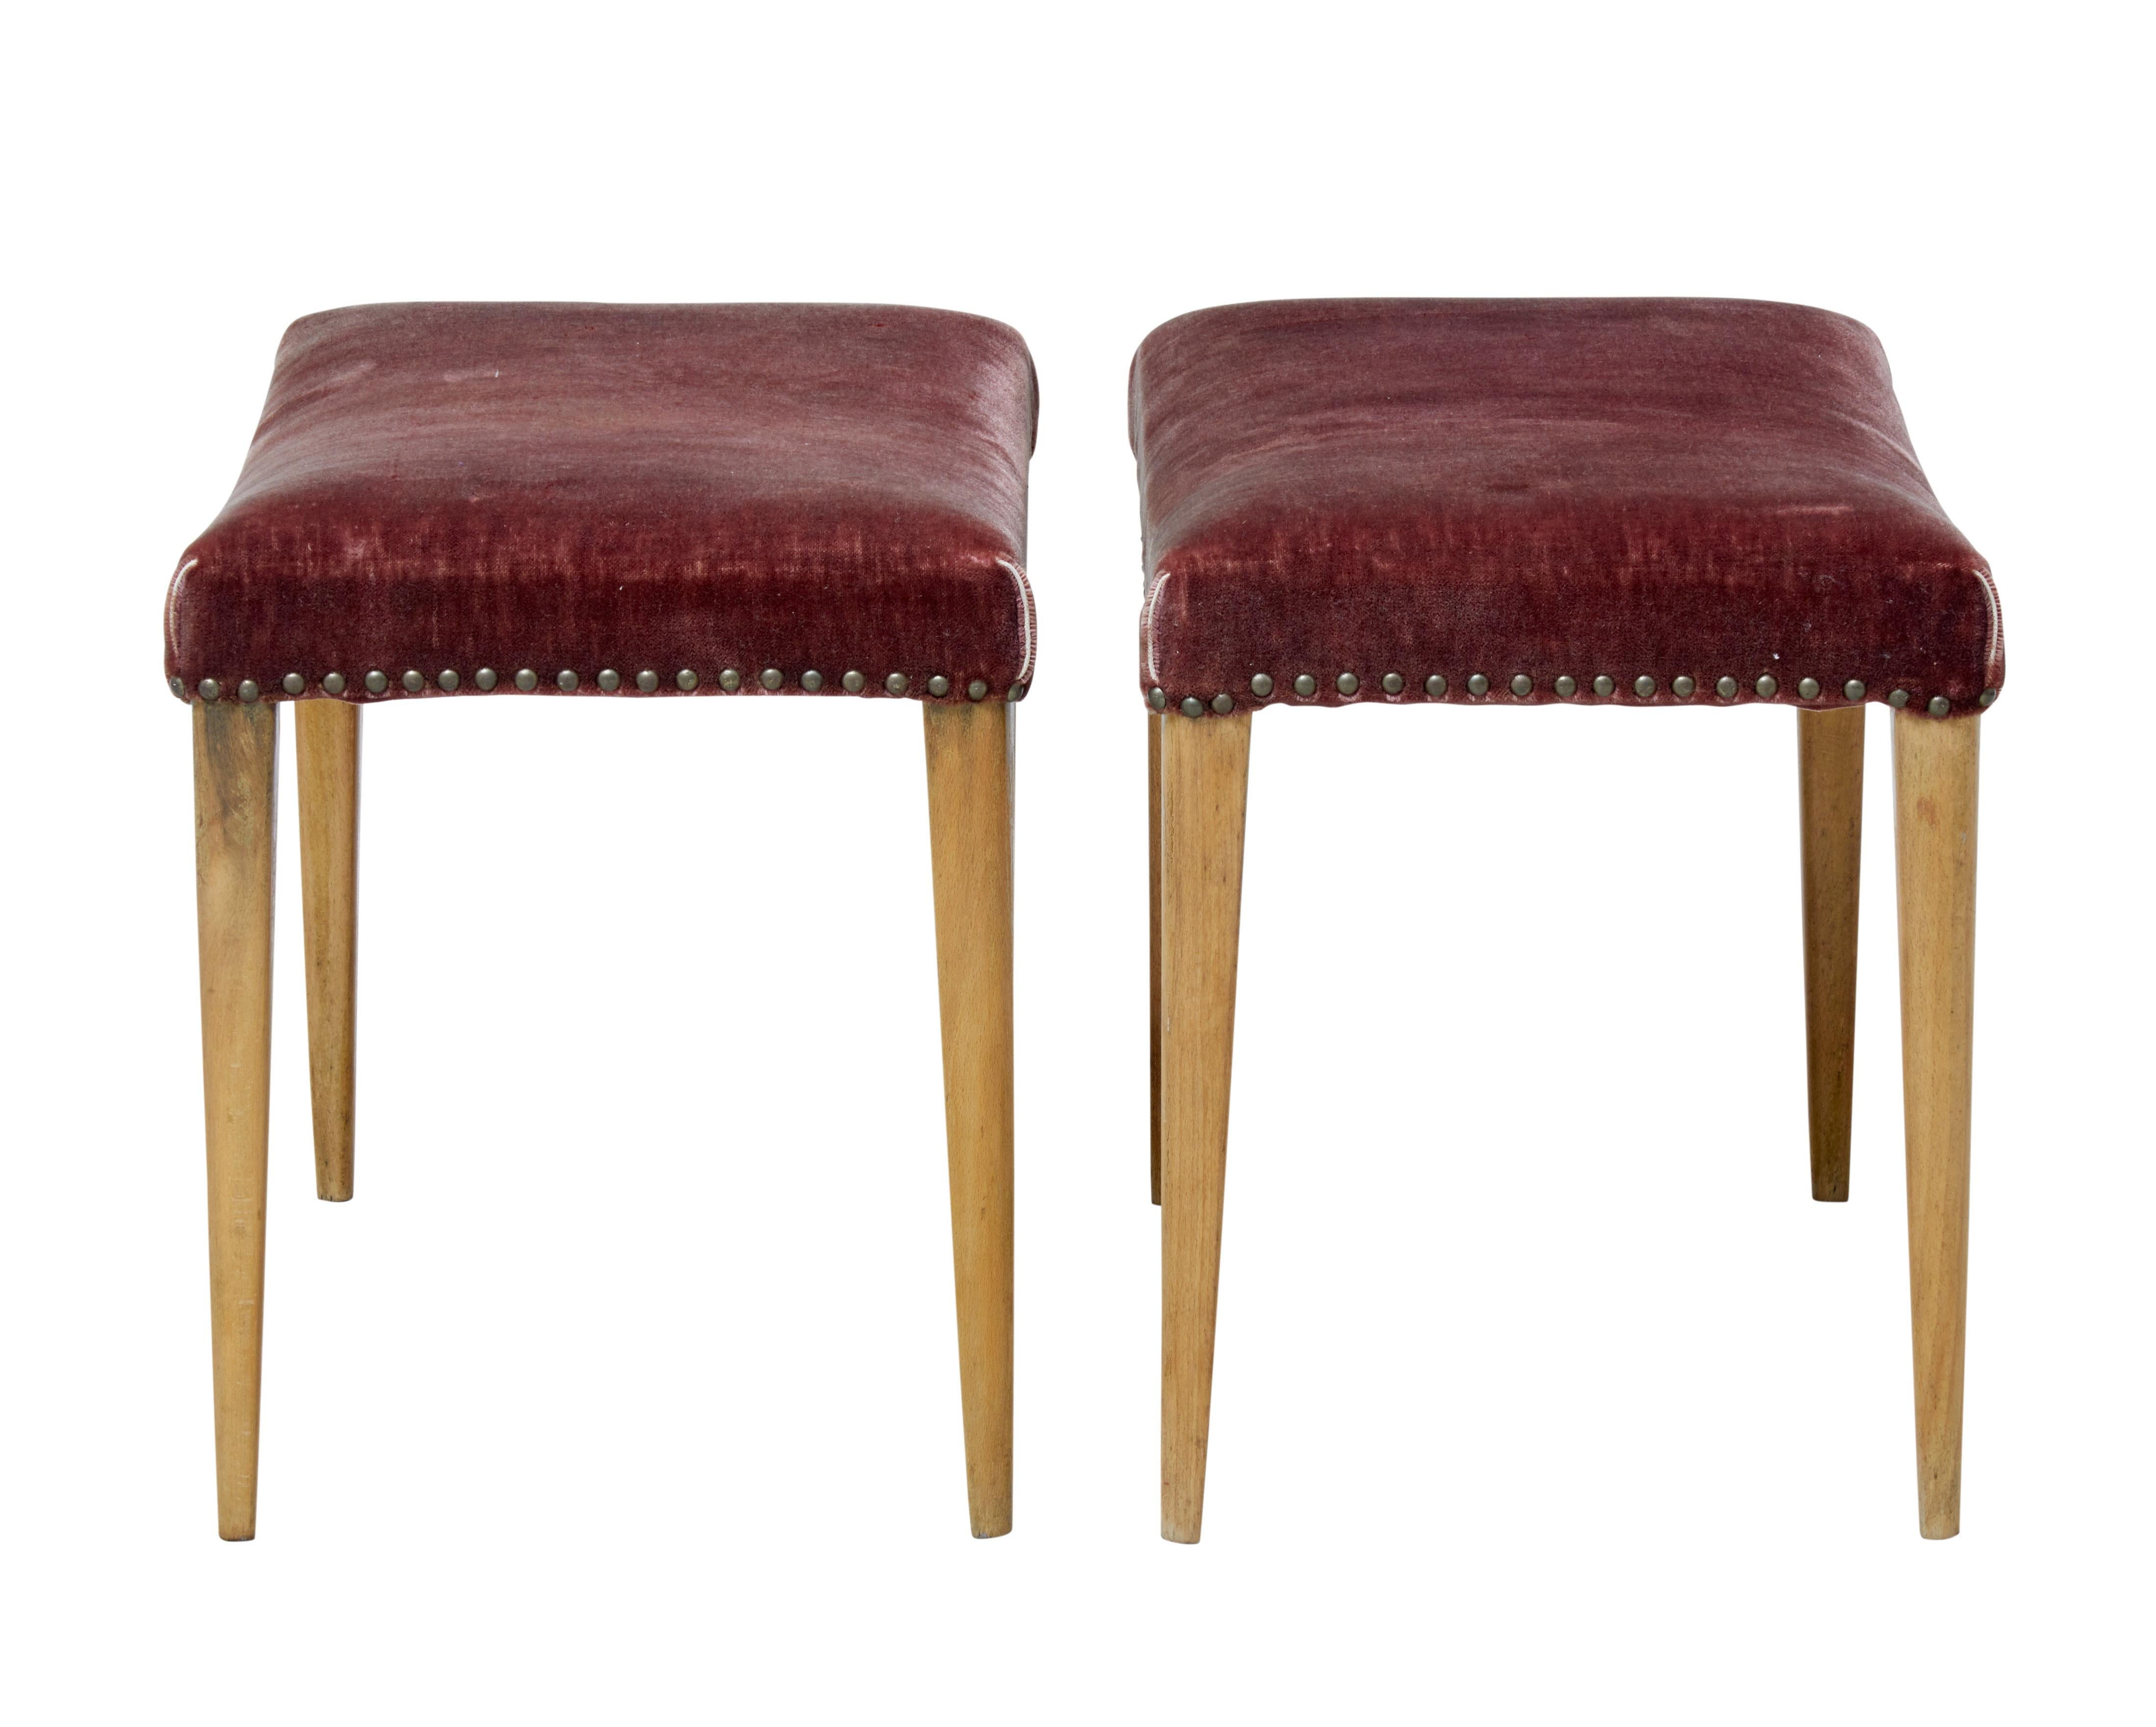 Pair of mid-20th century Scandinavian oak stools, circa 1950.

Pair of Scandinavian Modern designed stools that offer great potential.

Shaped seat covered in velvet with stud work. Standing on tapering oak legs.

Covering is usable albeit now